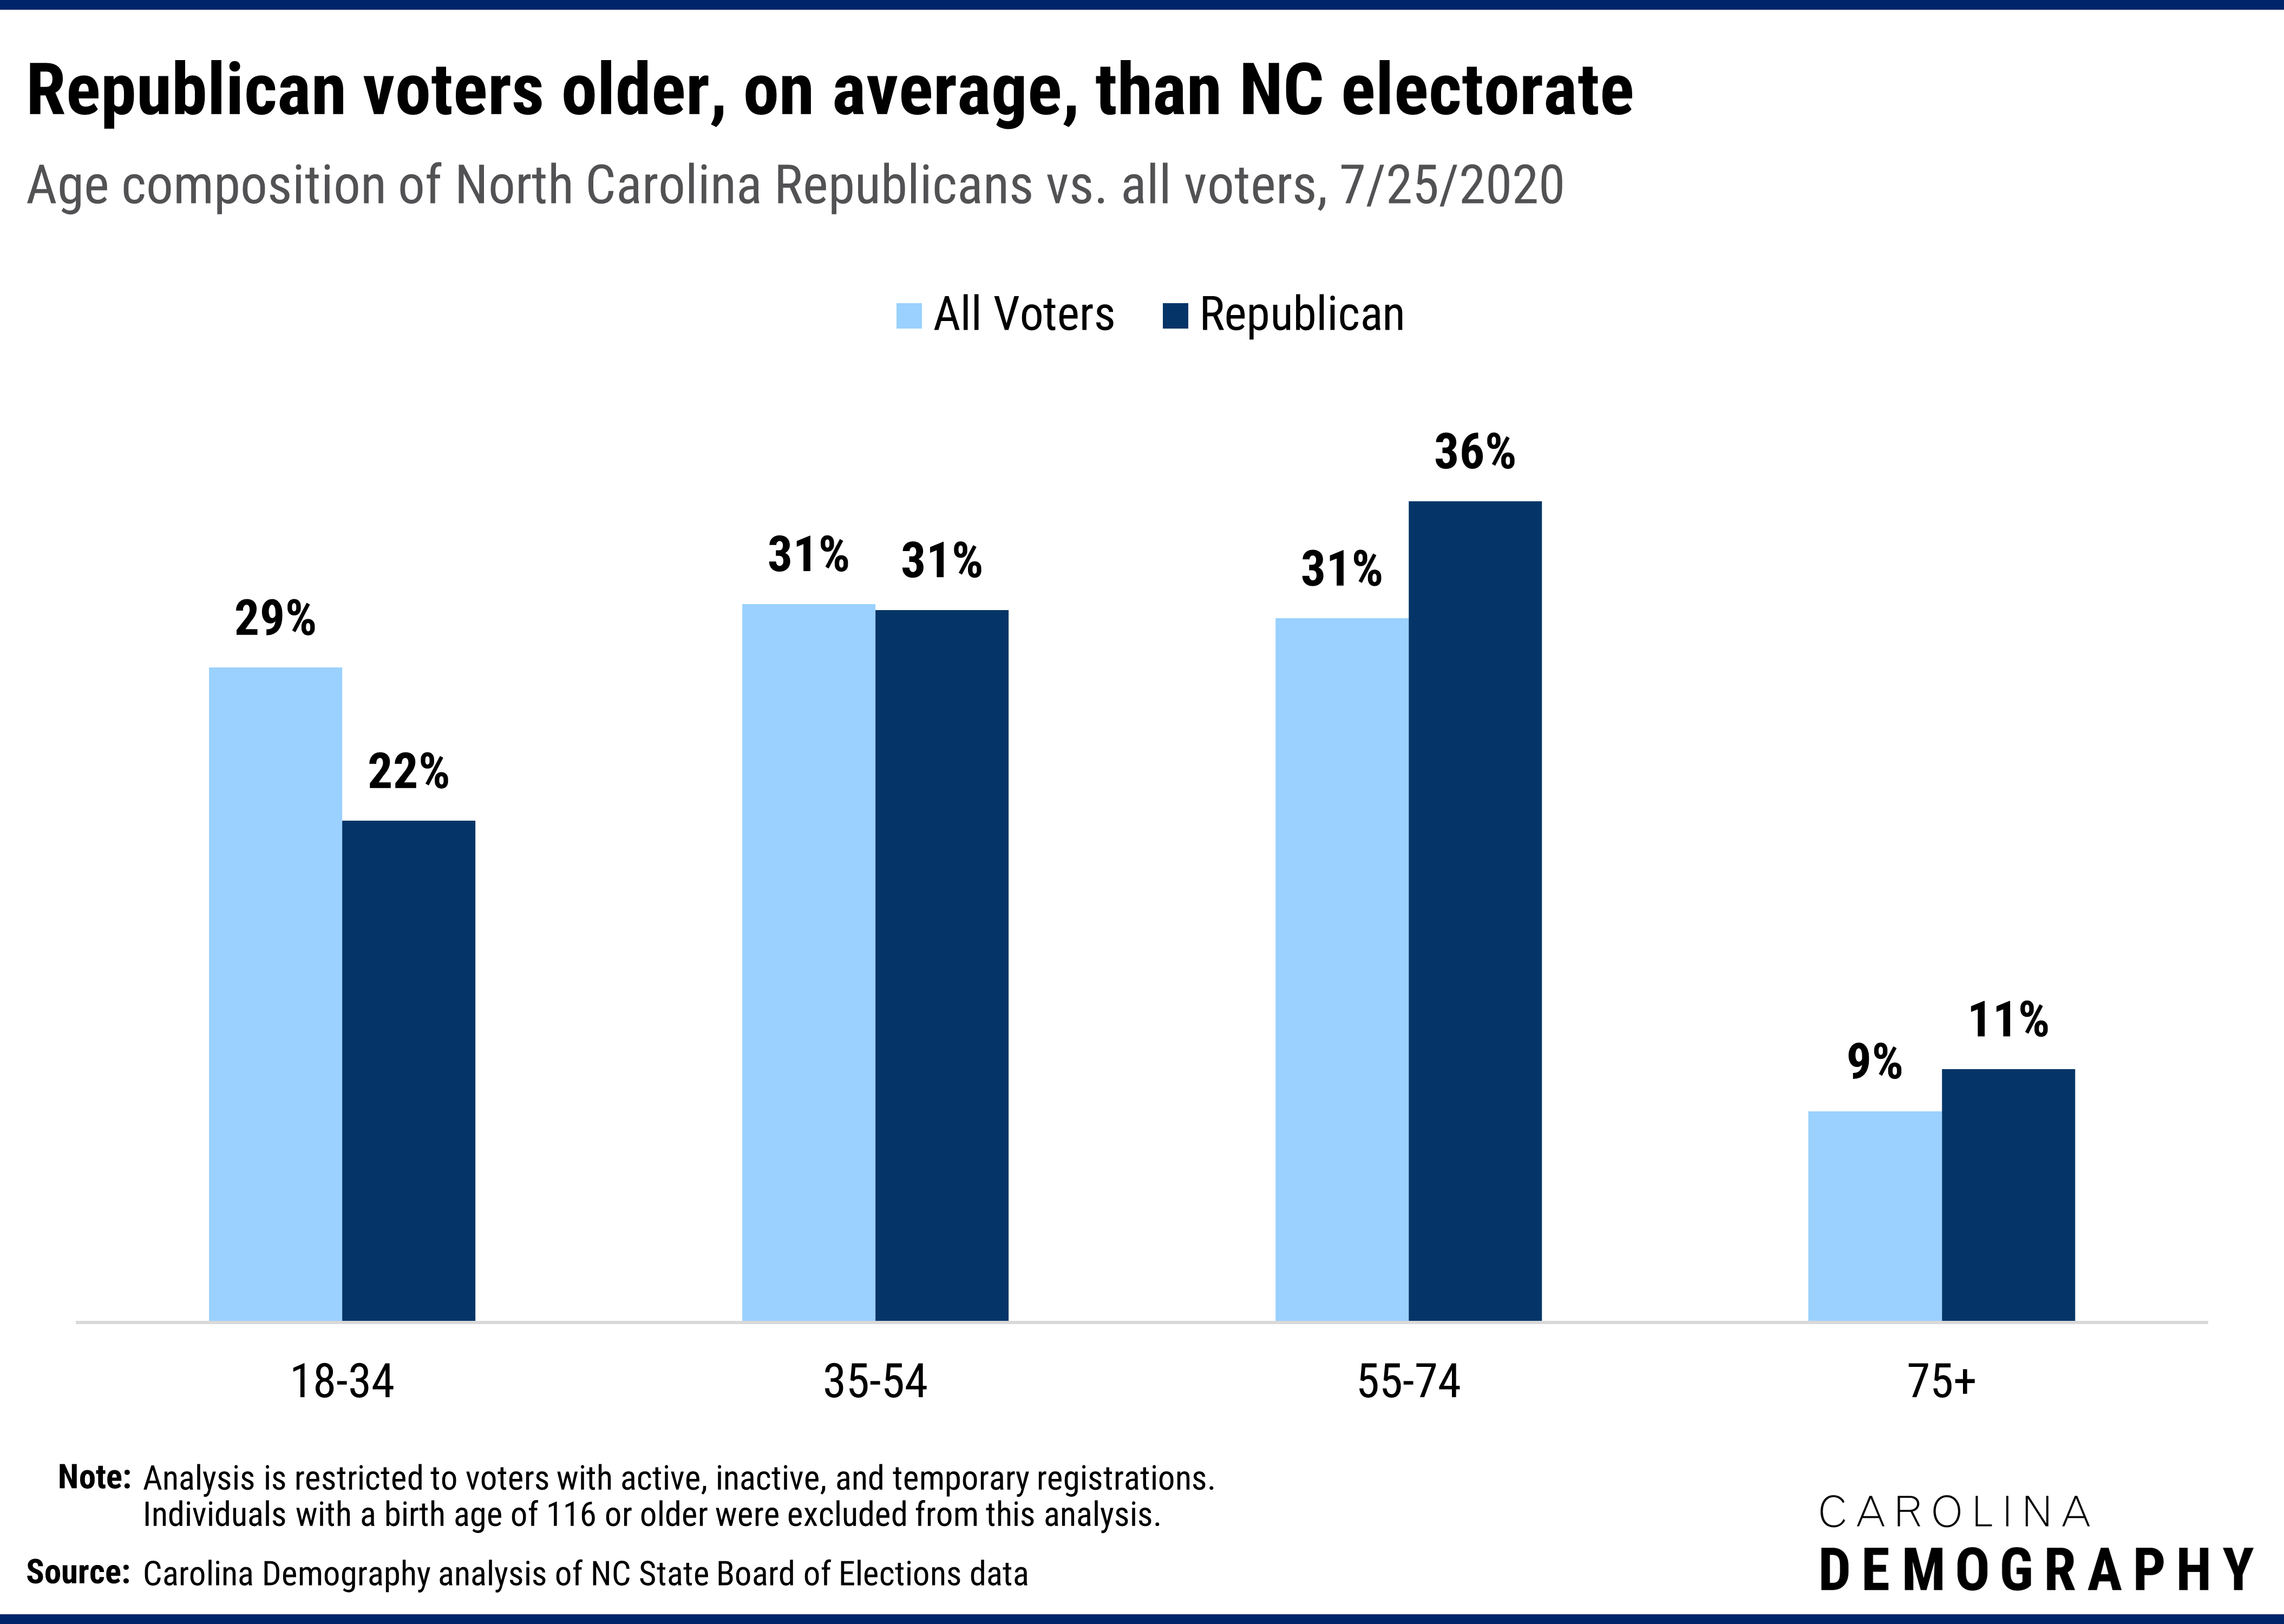 Republican voters older, on average, than NC electorate Age composition of North Carolina Republicans vs. all voters, 7/25/2020. Younger voters are the least likely to register as Republican, reflecting their higher affinity for registering unaffiliated. Just 23% of voters ages 18-34 are registered Republican compared to 30% of 35-54 year-olds, 35% of 55-74 year-olds, and 36% of voters ages 75 and older. As a result, older adults, especially those ages 55-74, comprise a larger share of Republican voters than the overall electorate: 40% of all voters are ages 55+ compared to 47% of registered Republican voters.